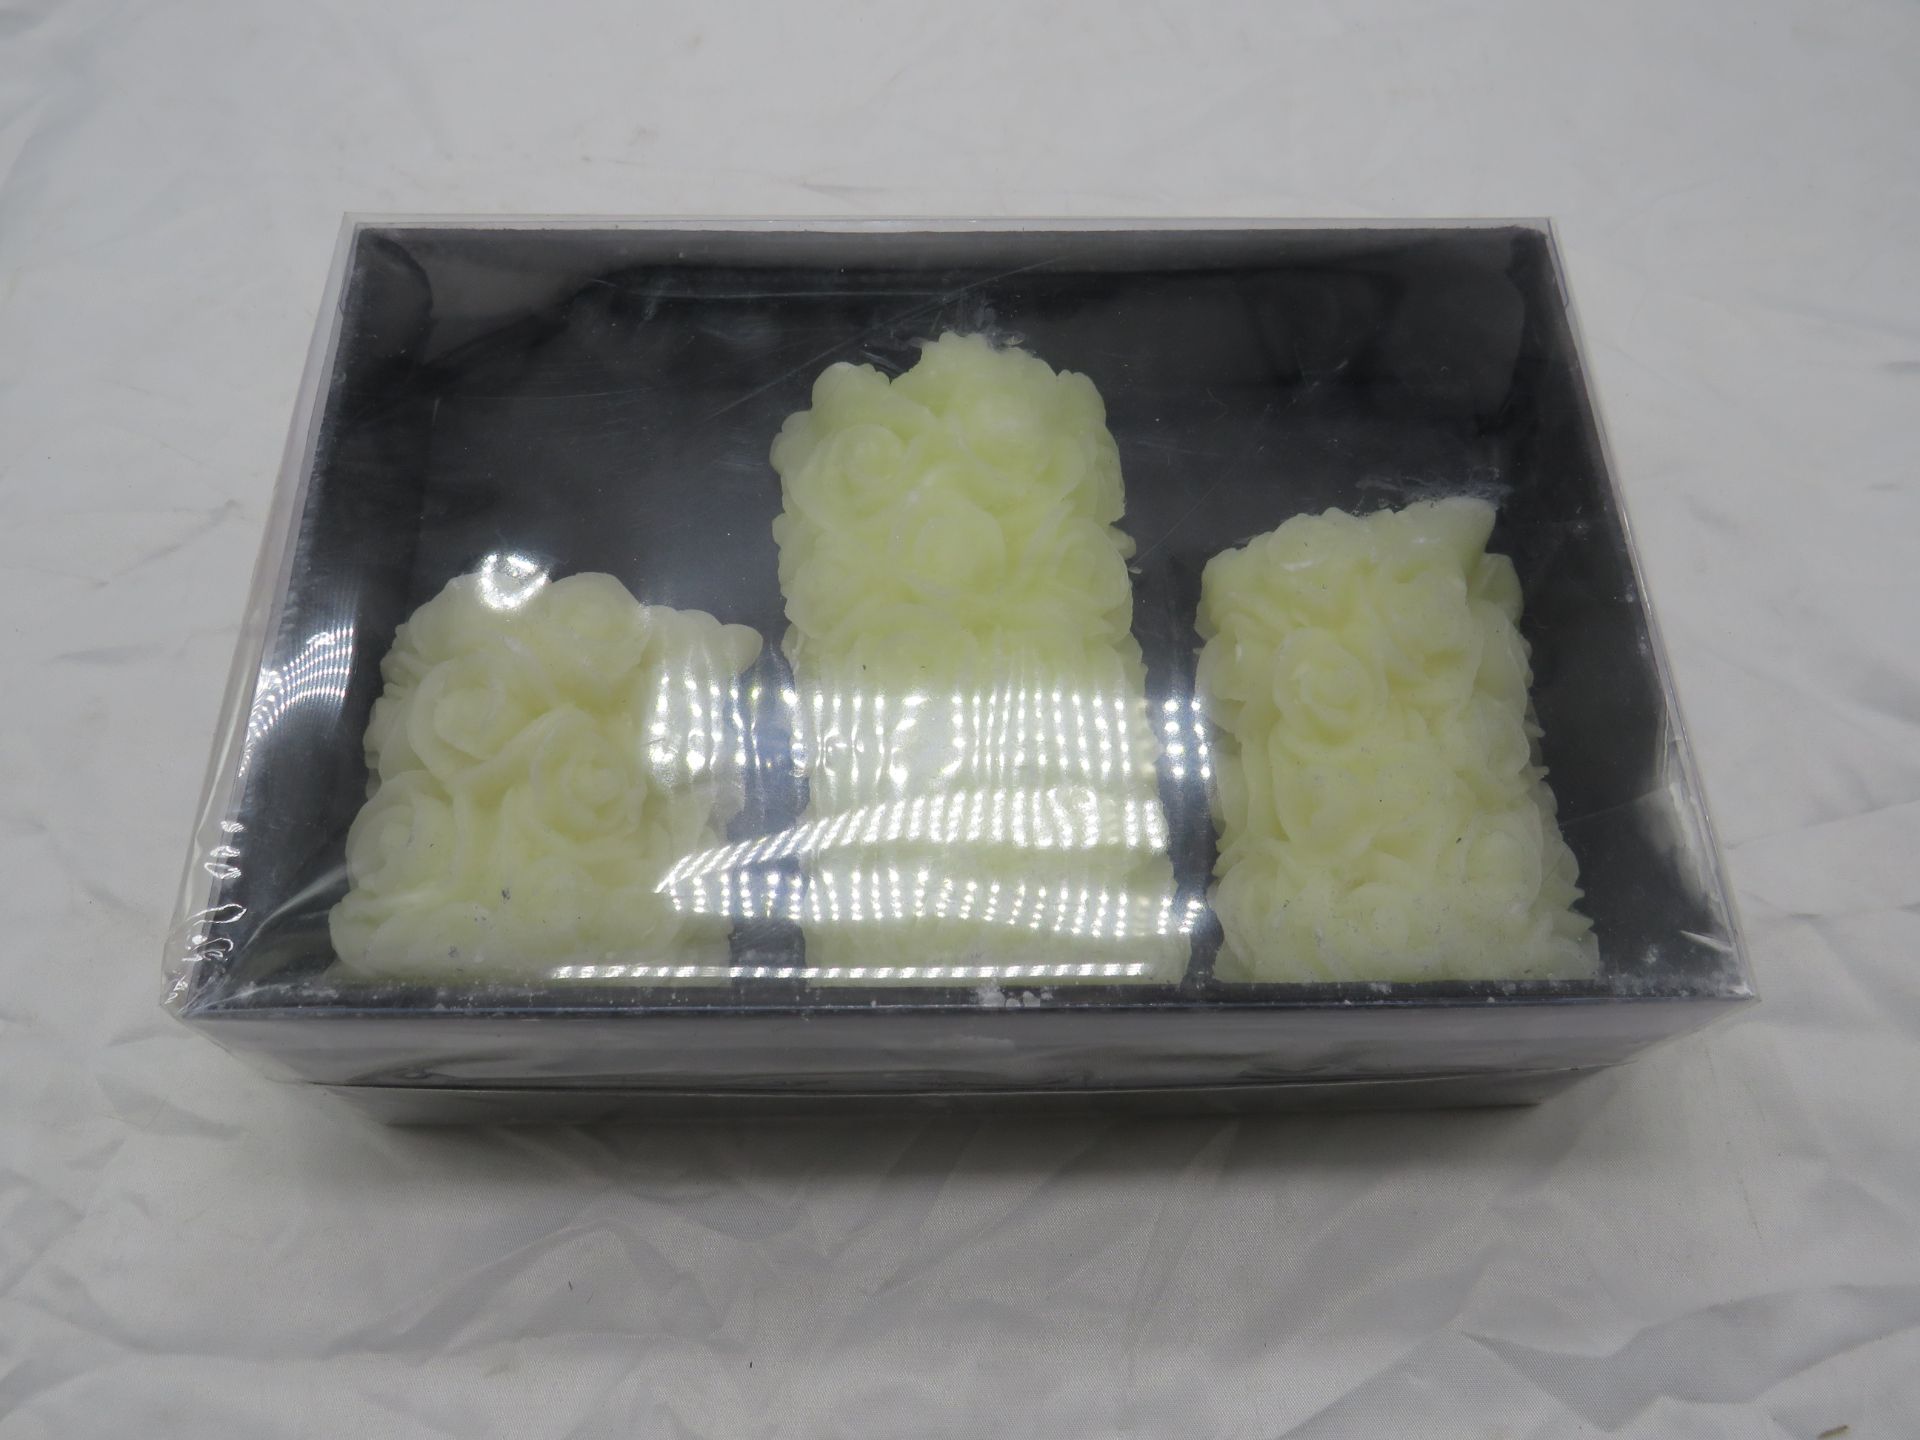 Set of 3 White Rose Pillar Candles - New & Packaged.